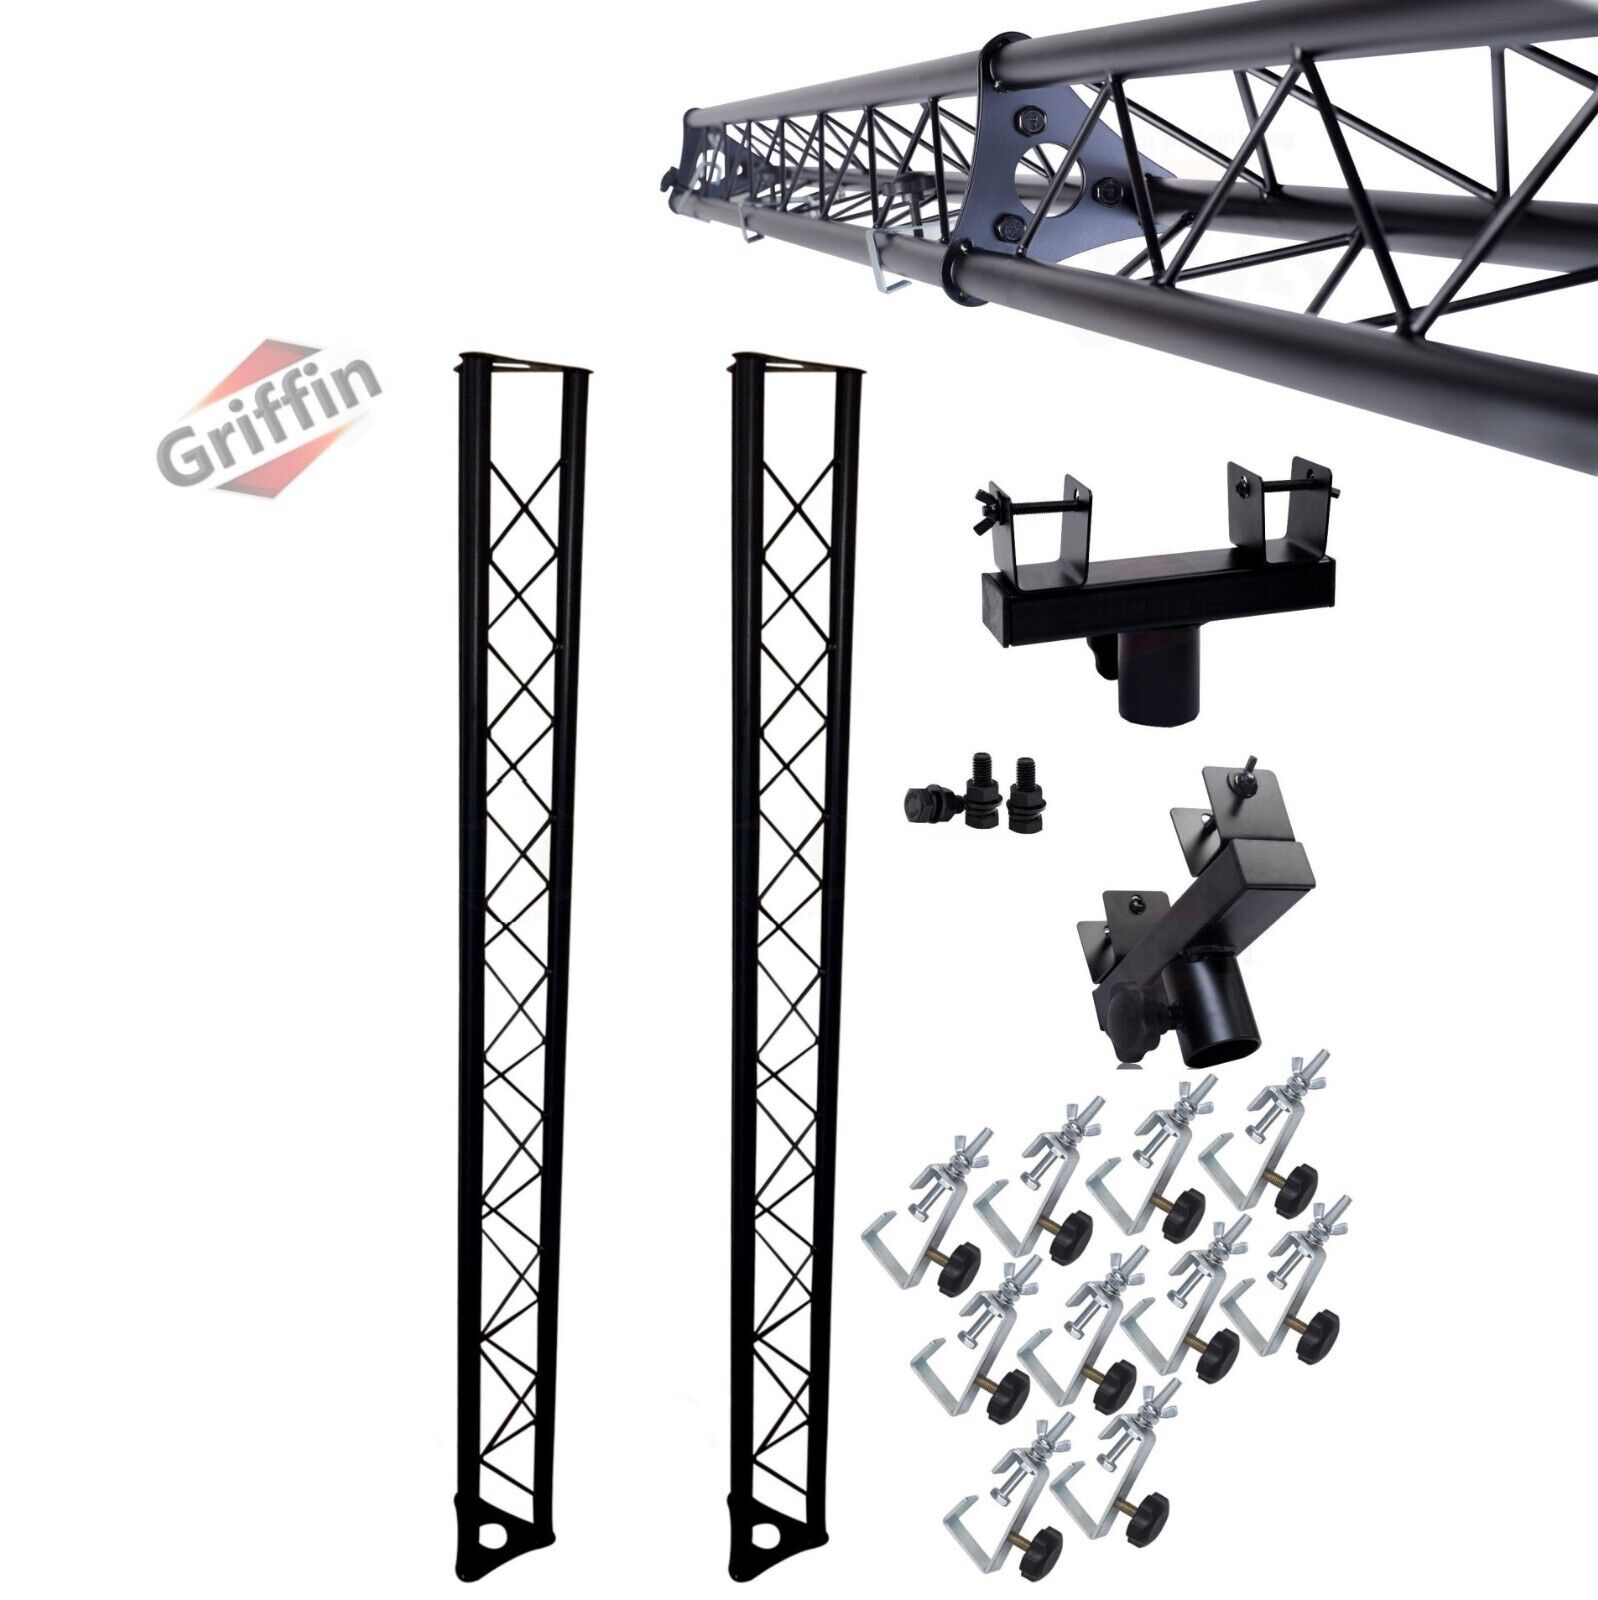 2 PACK Triangle Truss Kit DJ Booth Trussing Section Stage Segment Lighting Stand Griffin LG-2XTrussFF